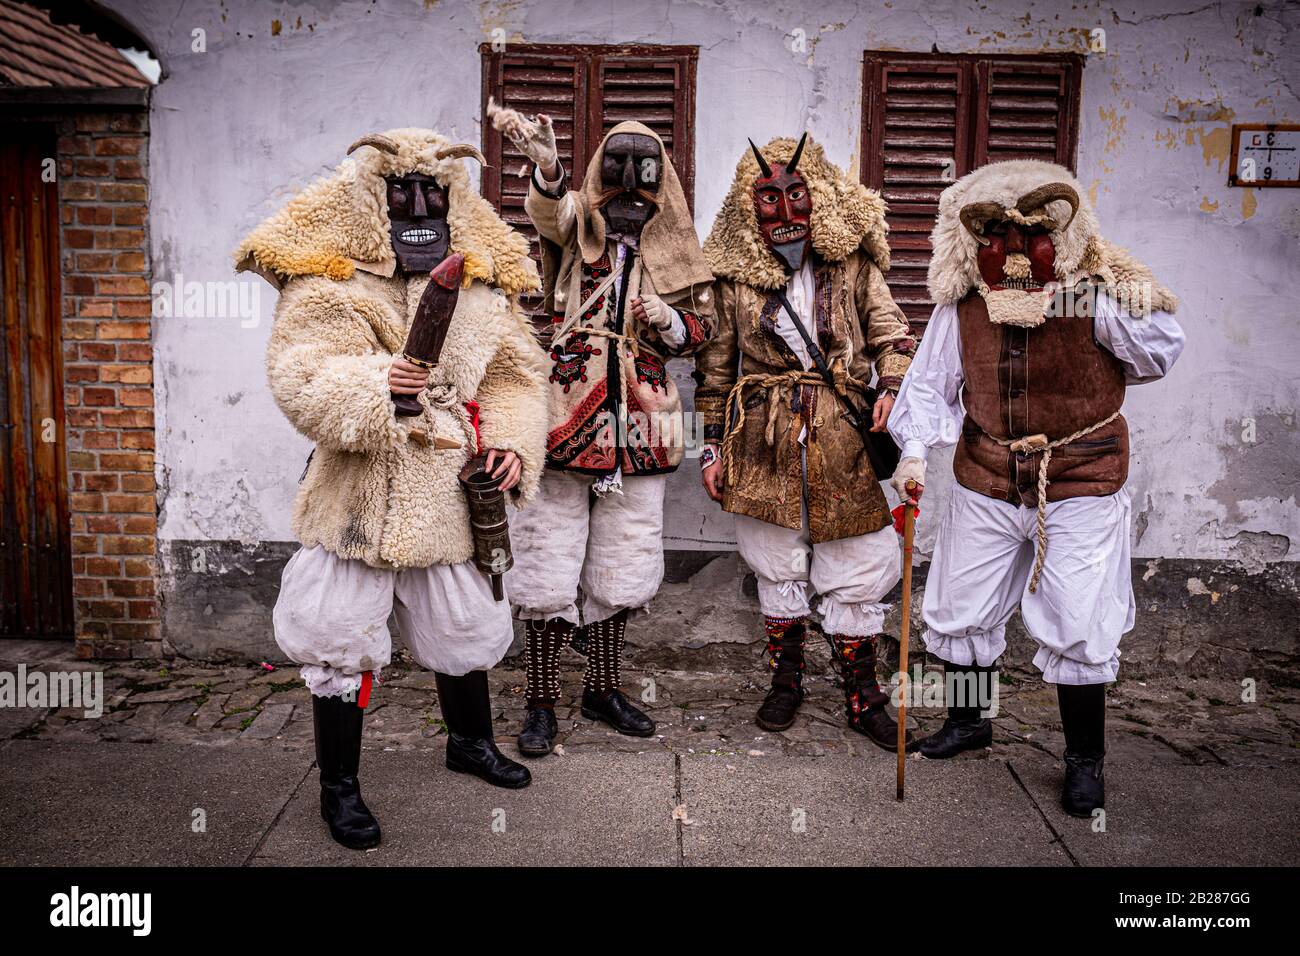 Four men dressed in "buso" costume during the annual buso festivities in Mohacs, Southern Hungary Stock Photo